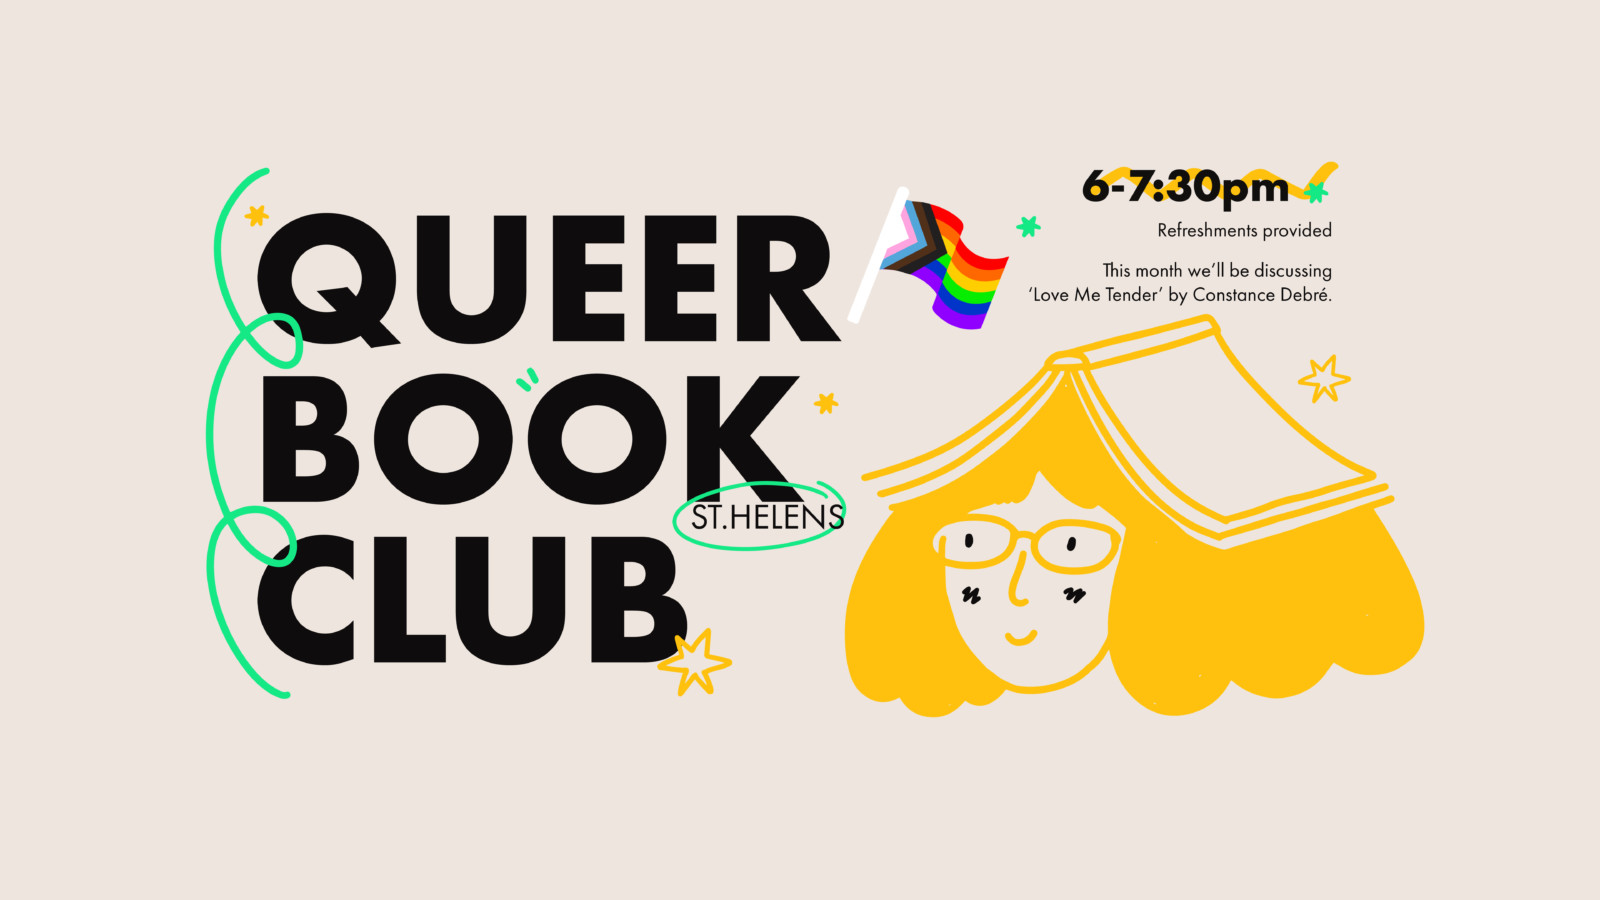 A graphic reading 'QUEER BOOK CLUB' with an illustration of a person with curly hair with a book open upside down on their head.